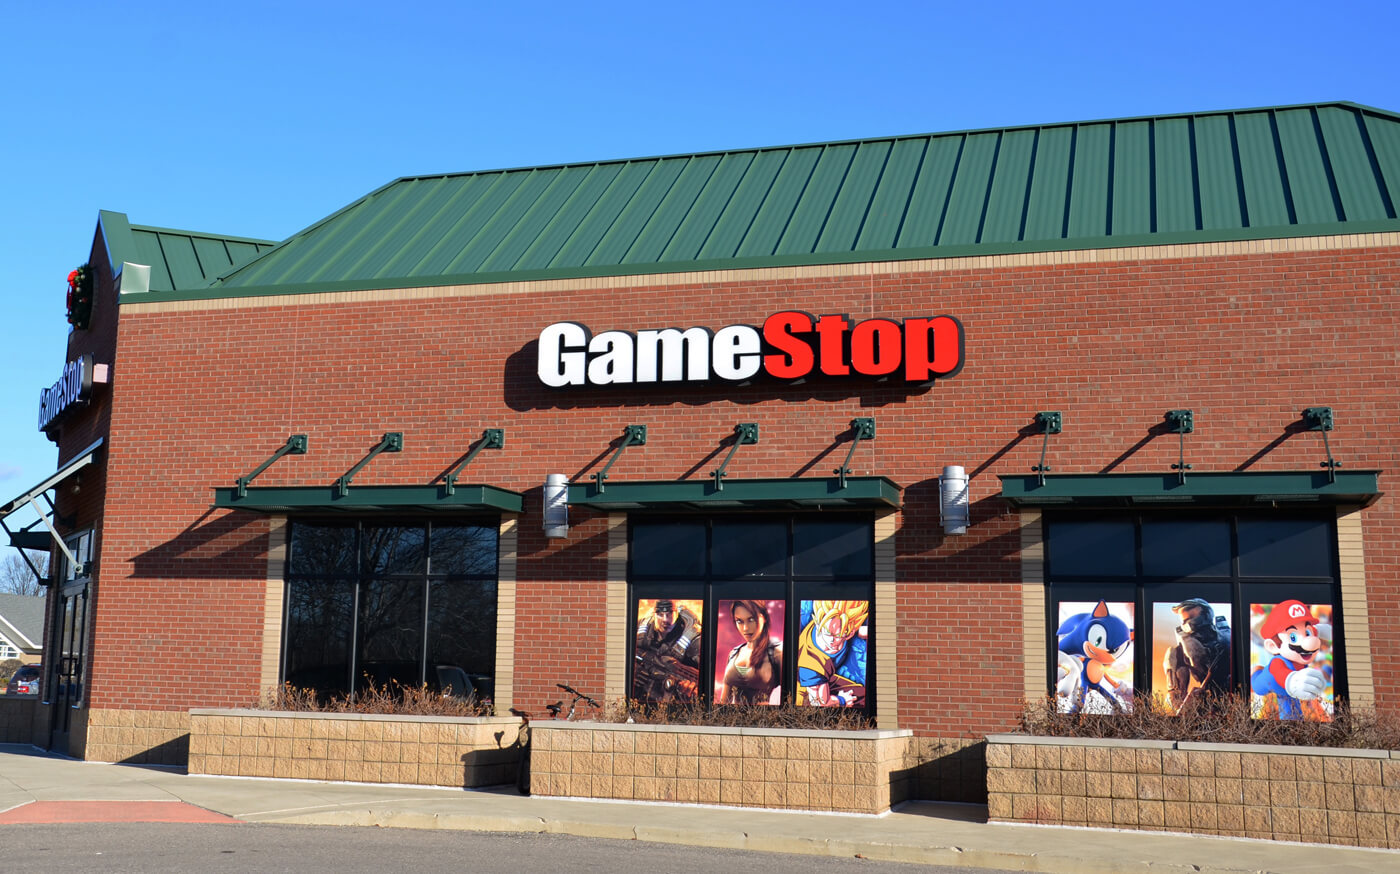 GameStop restricts customer access to stores, enables curbside pick-up